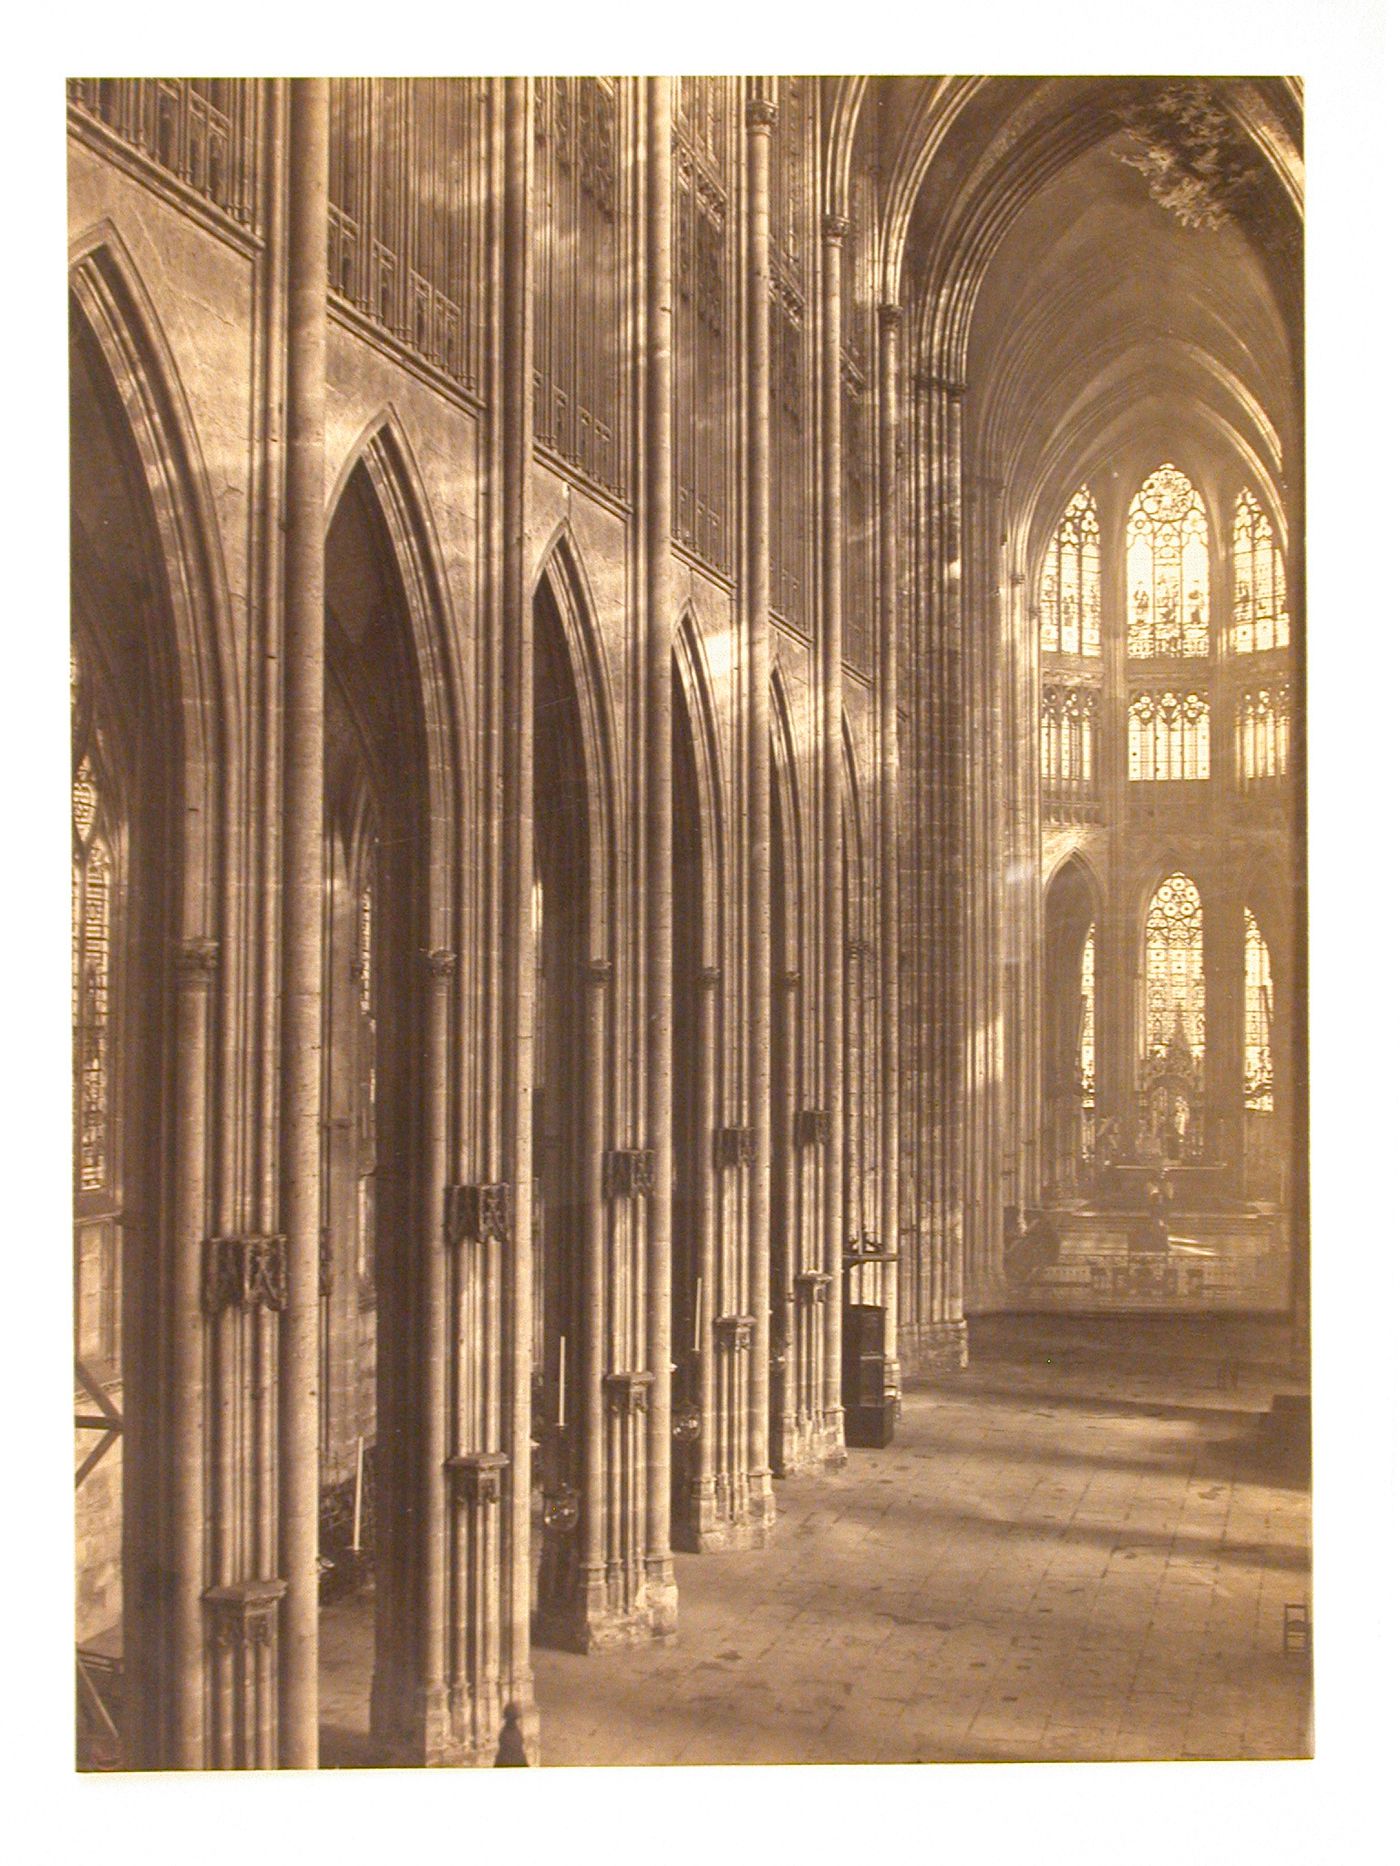 View of interior of nave of St. Ouen, Rouen, France